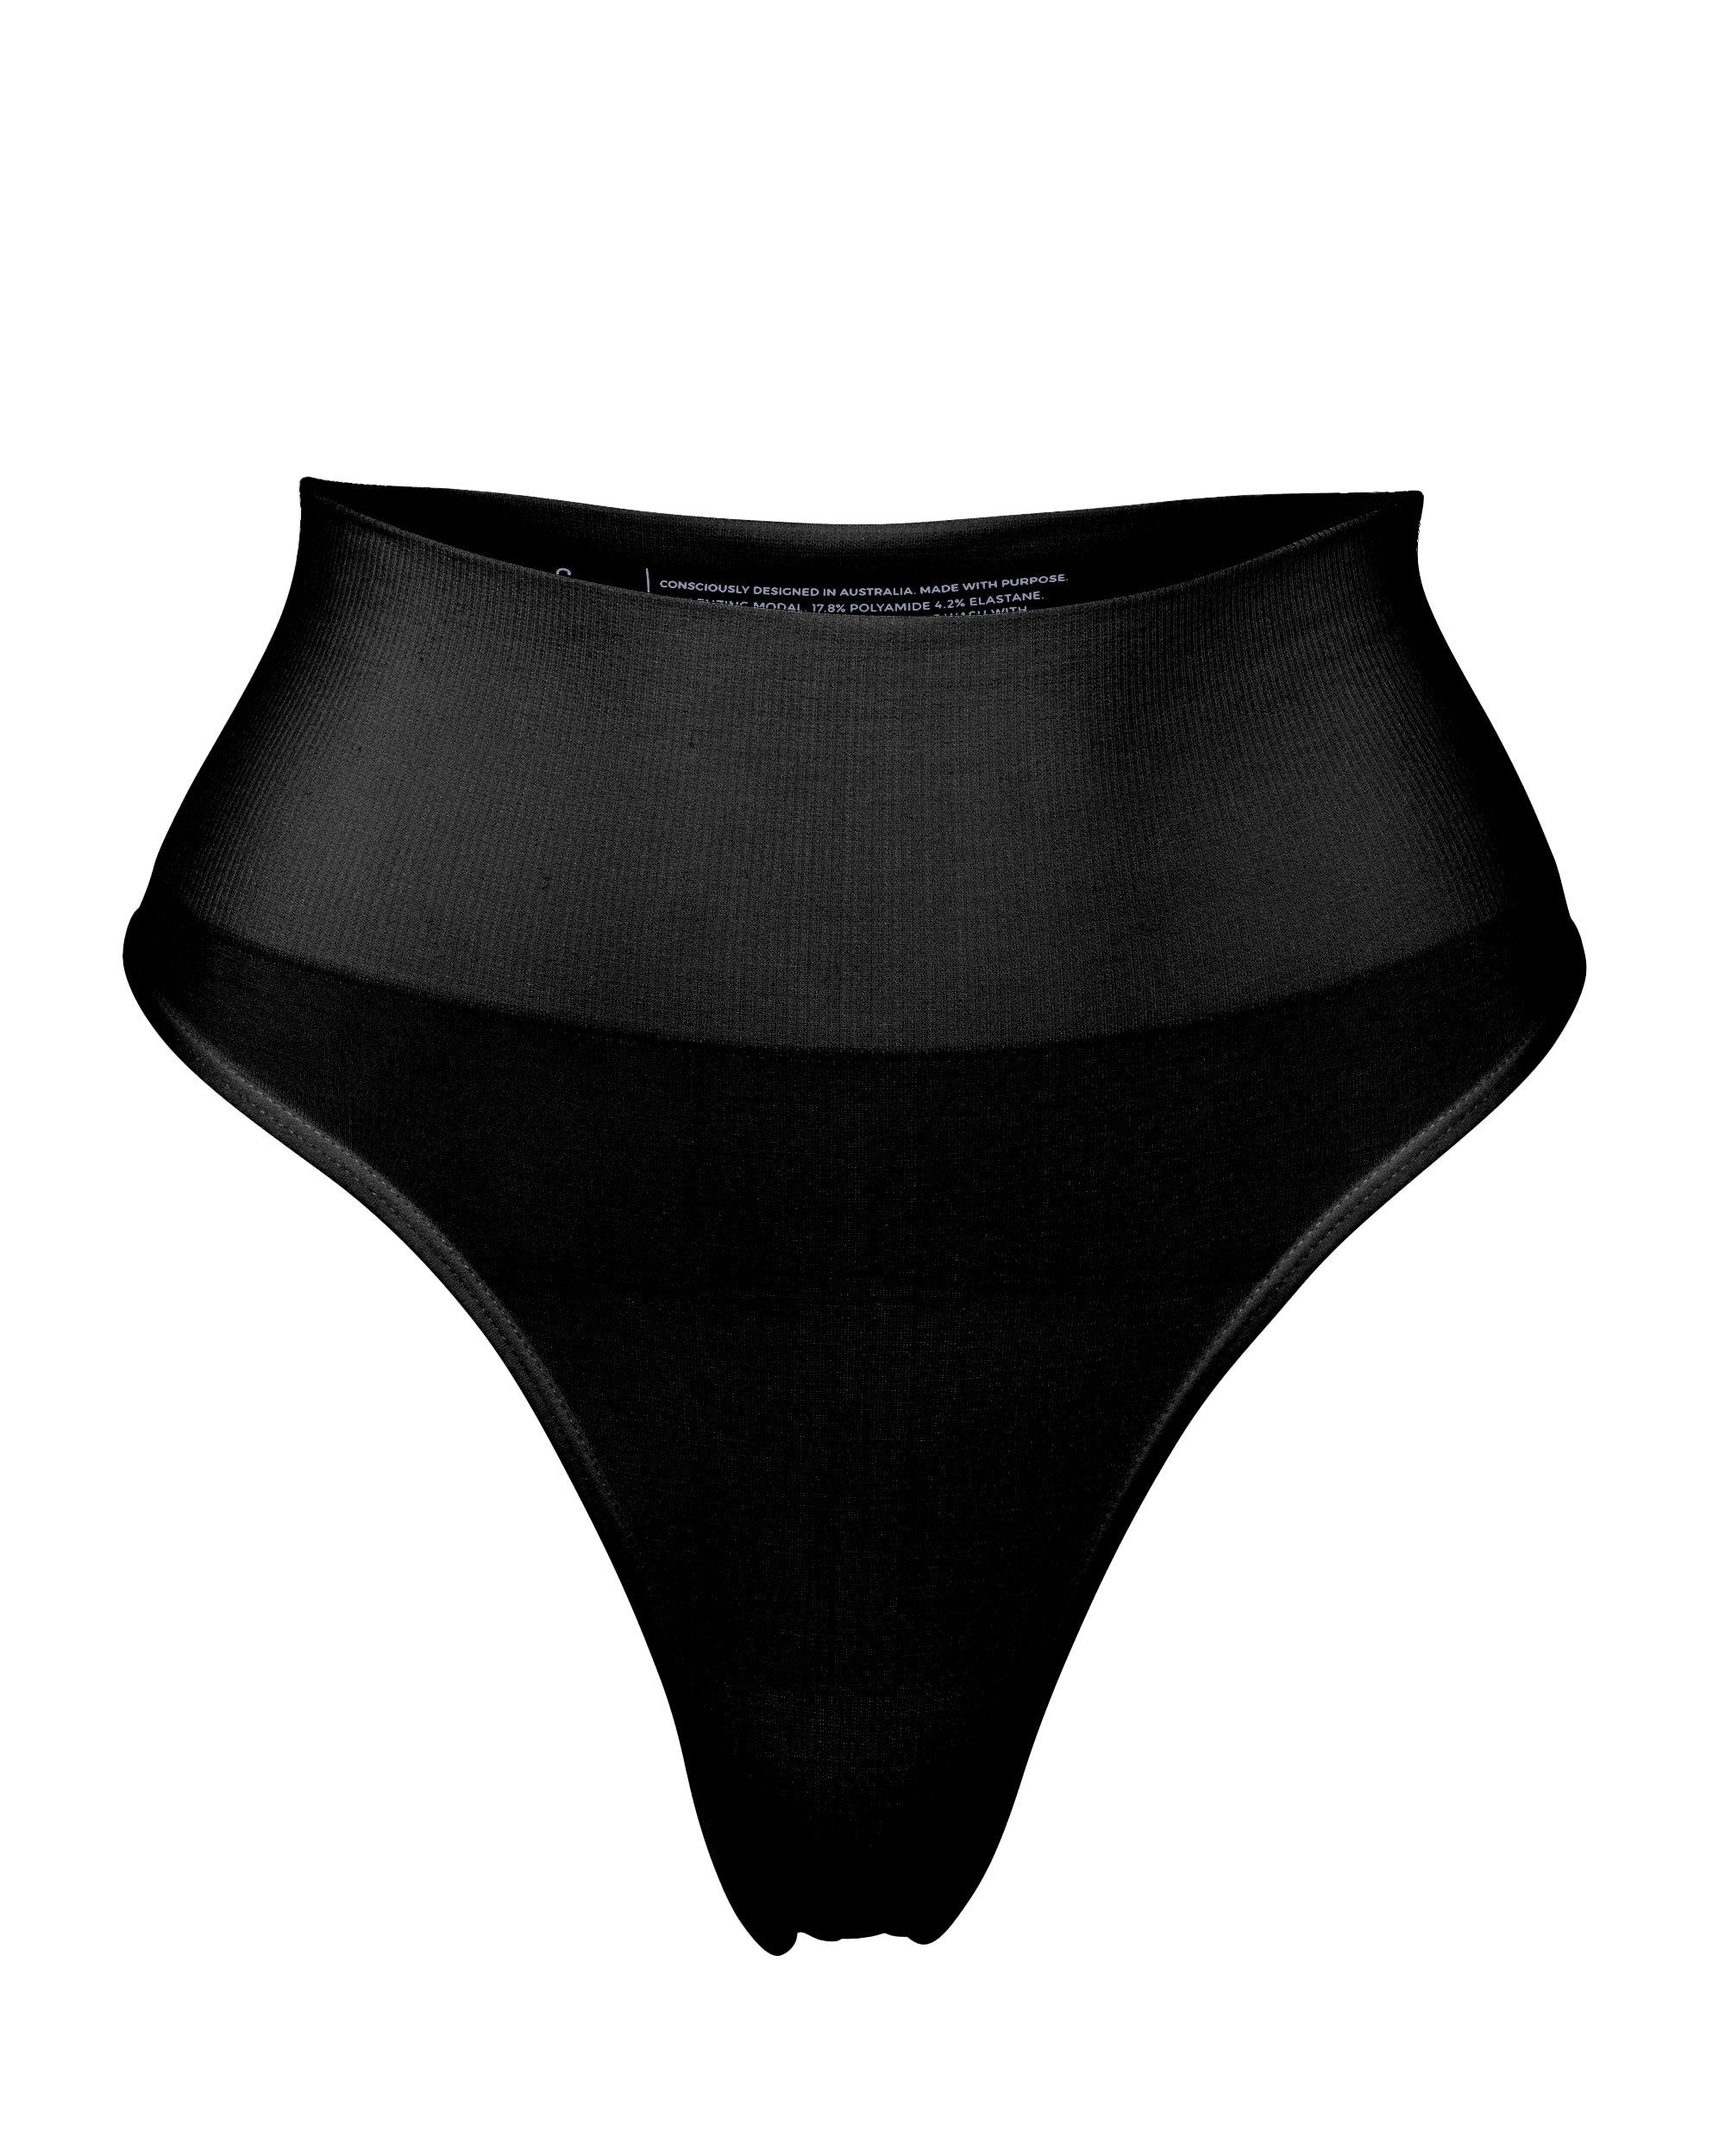 THE BEST FITTING PANTY - NEW - XL 8 - BLACK/PINK TRIM - G STRING